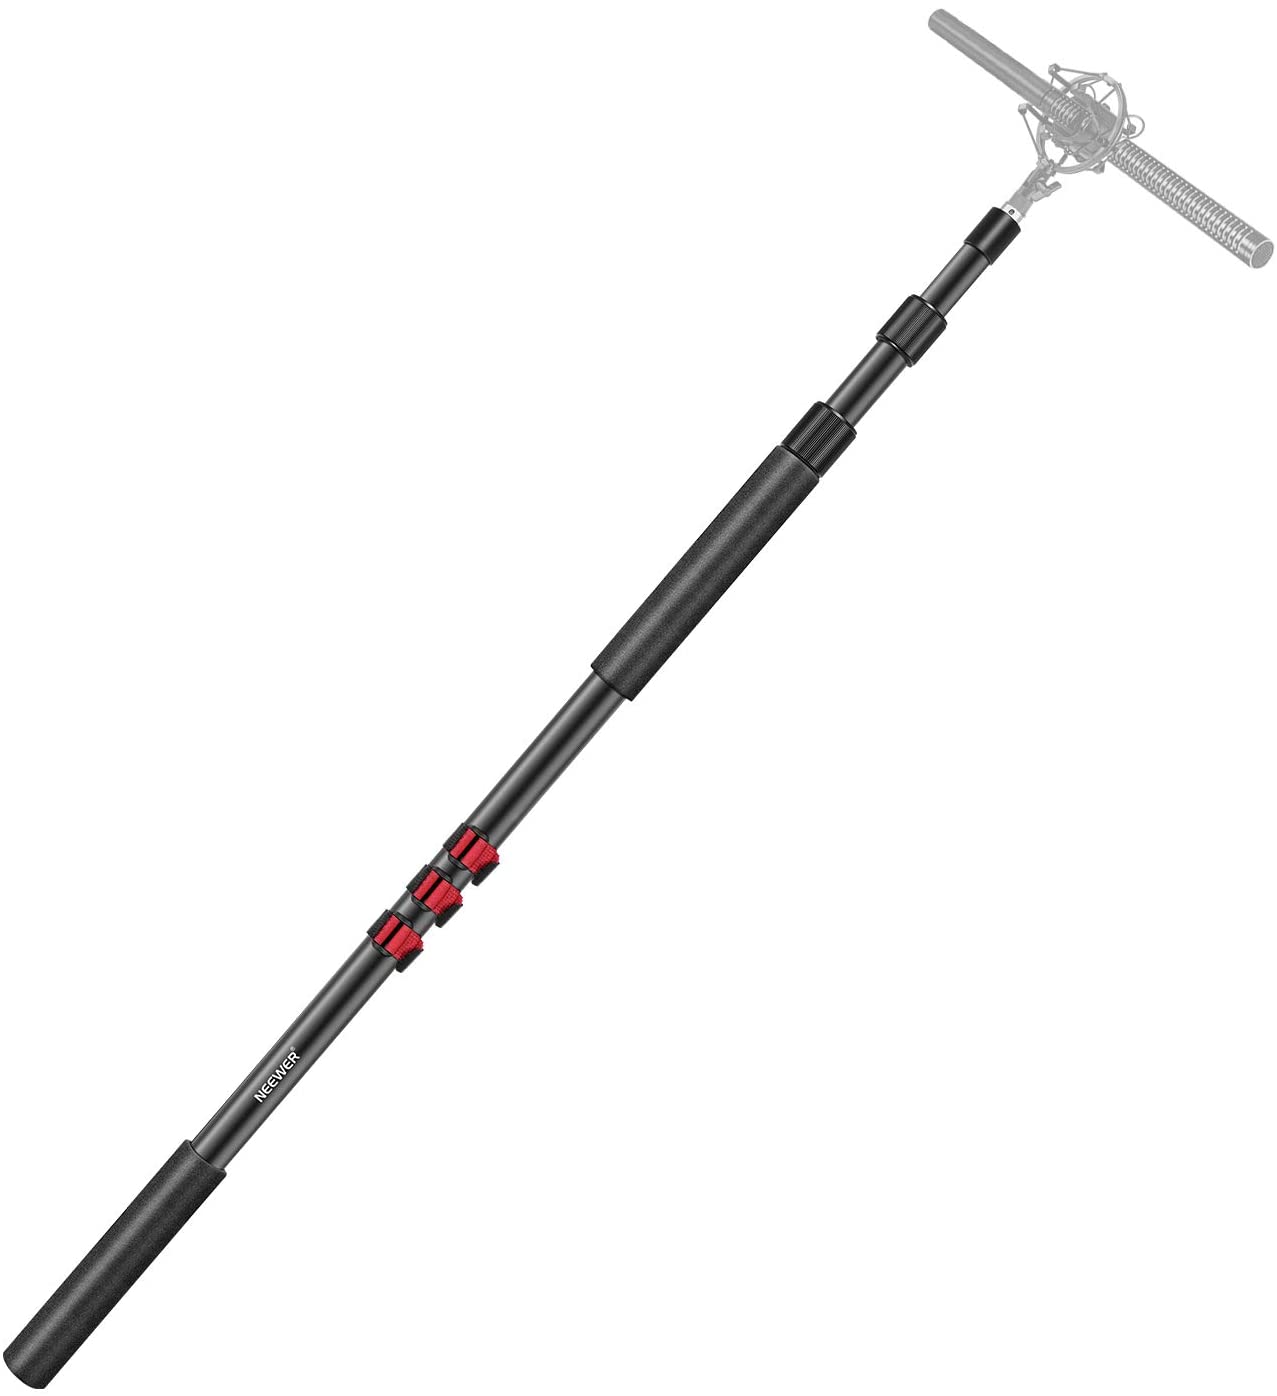 Neewer NW-7000 Microphone Boom Arm, 3-Section Extendable Handheld Mic Arm with 1/4” to 3/8” Threads, 3ft to 8ft Adjustable Length